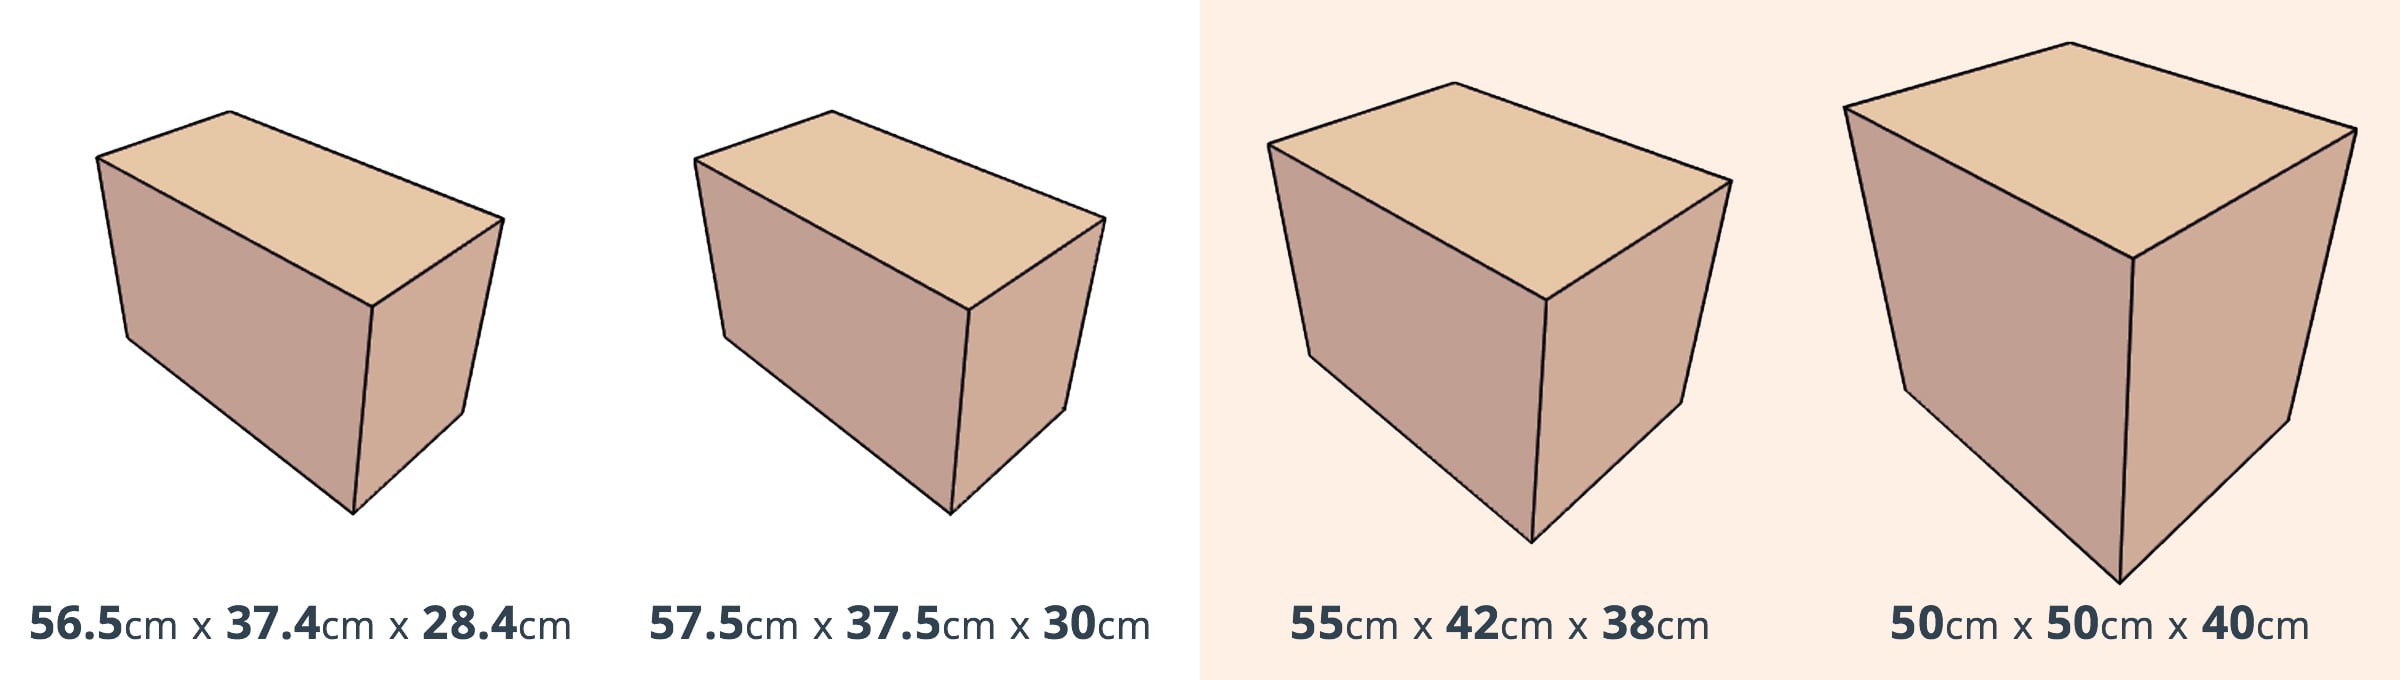 Check-in size packaging dimensions